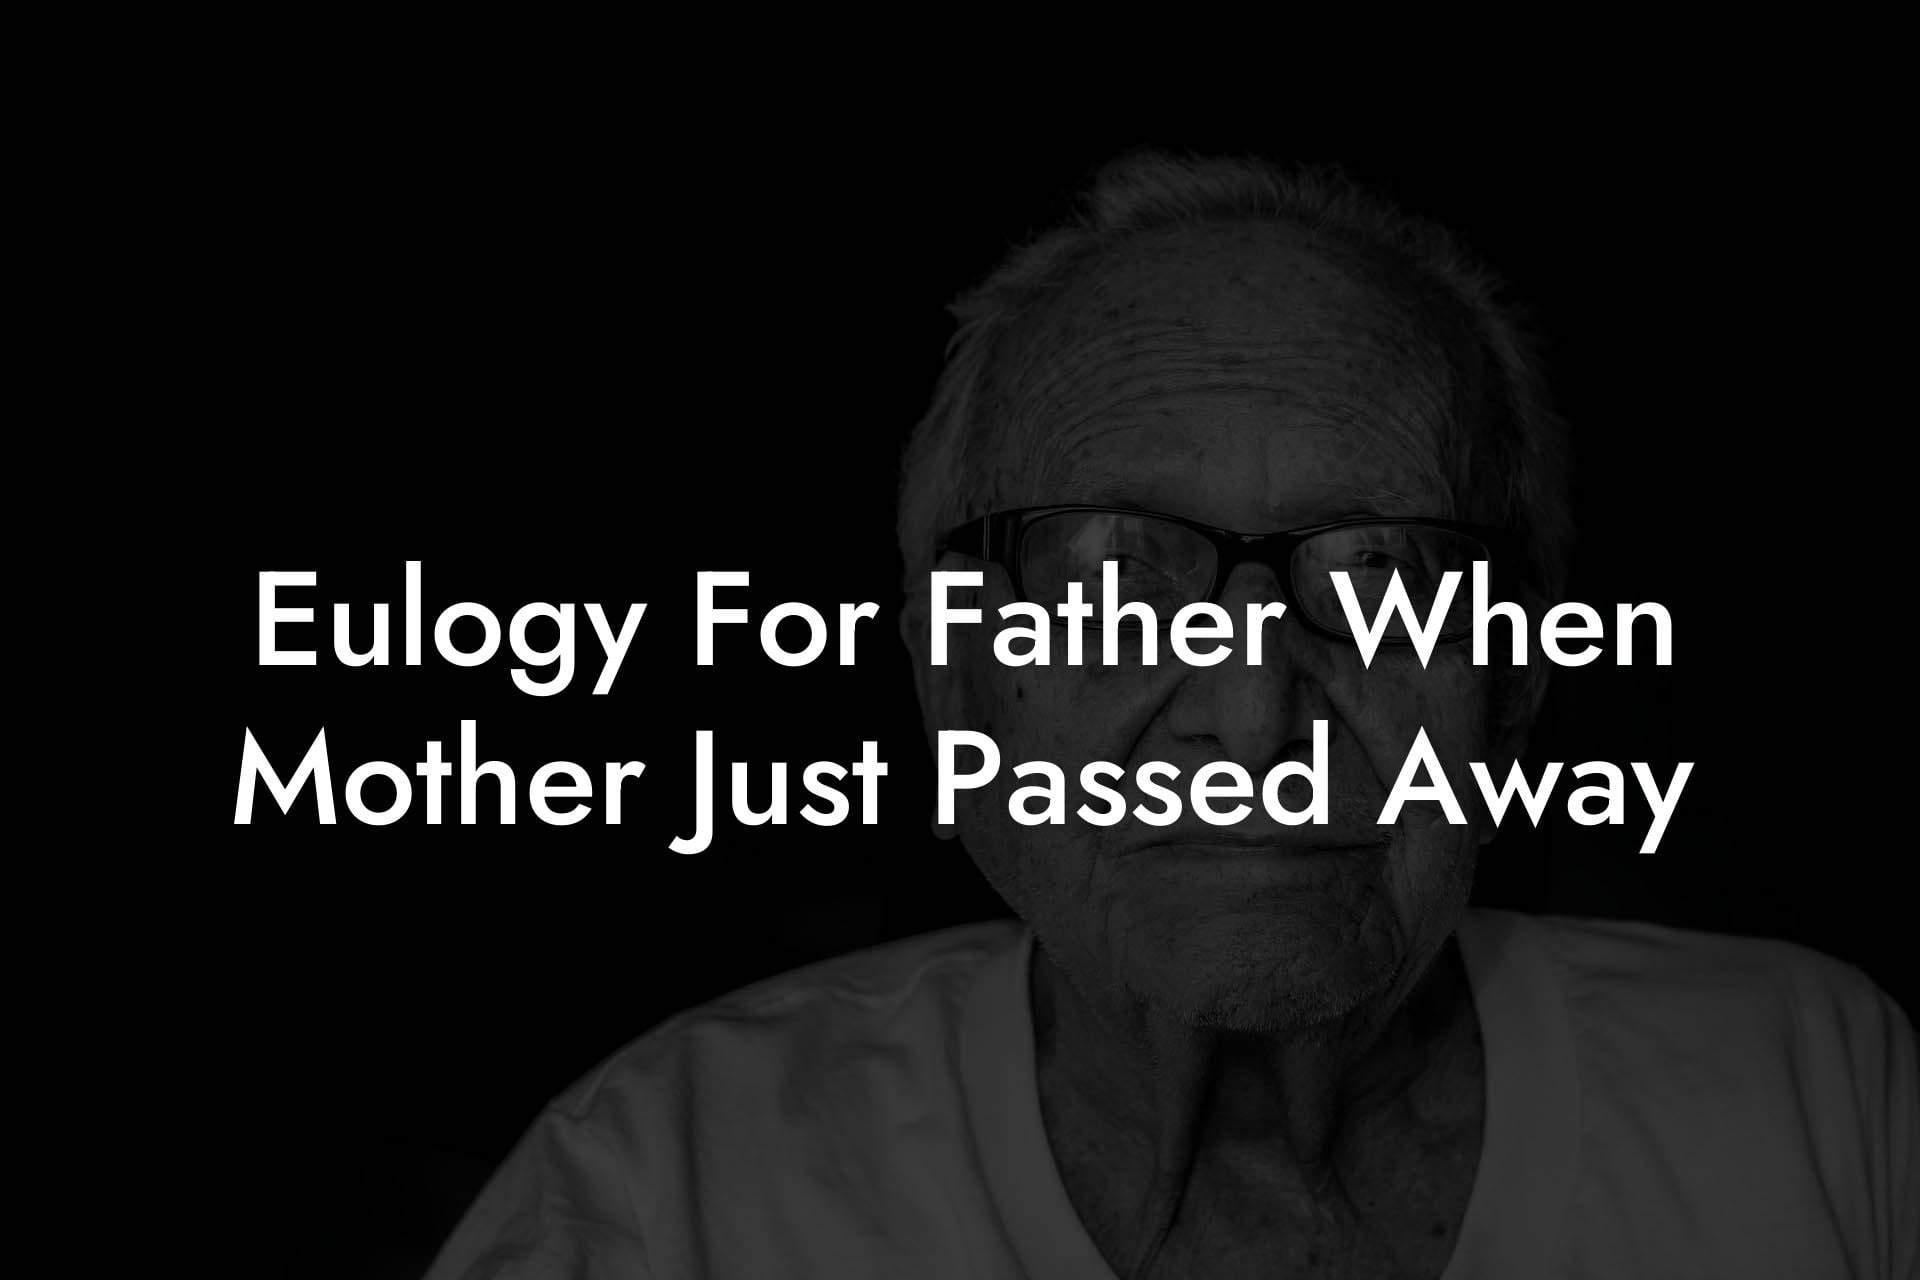 Eulogy For Father When Mother Just Passed Away